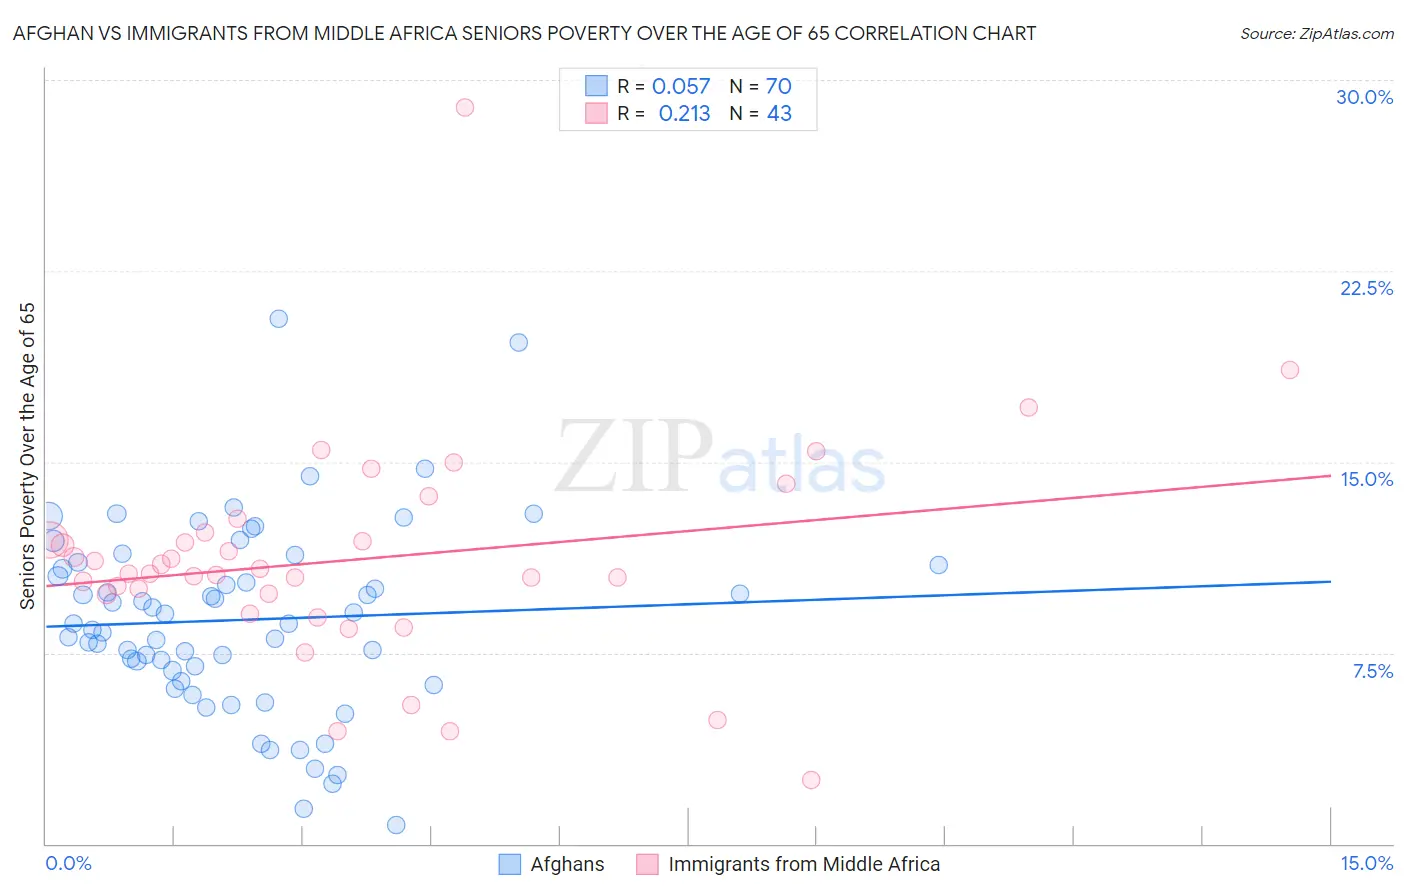 Afghan vs Immigrants from Middle Africa Seniors Poverty Over the Age of 65